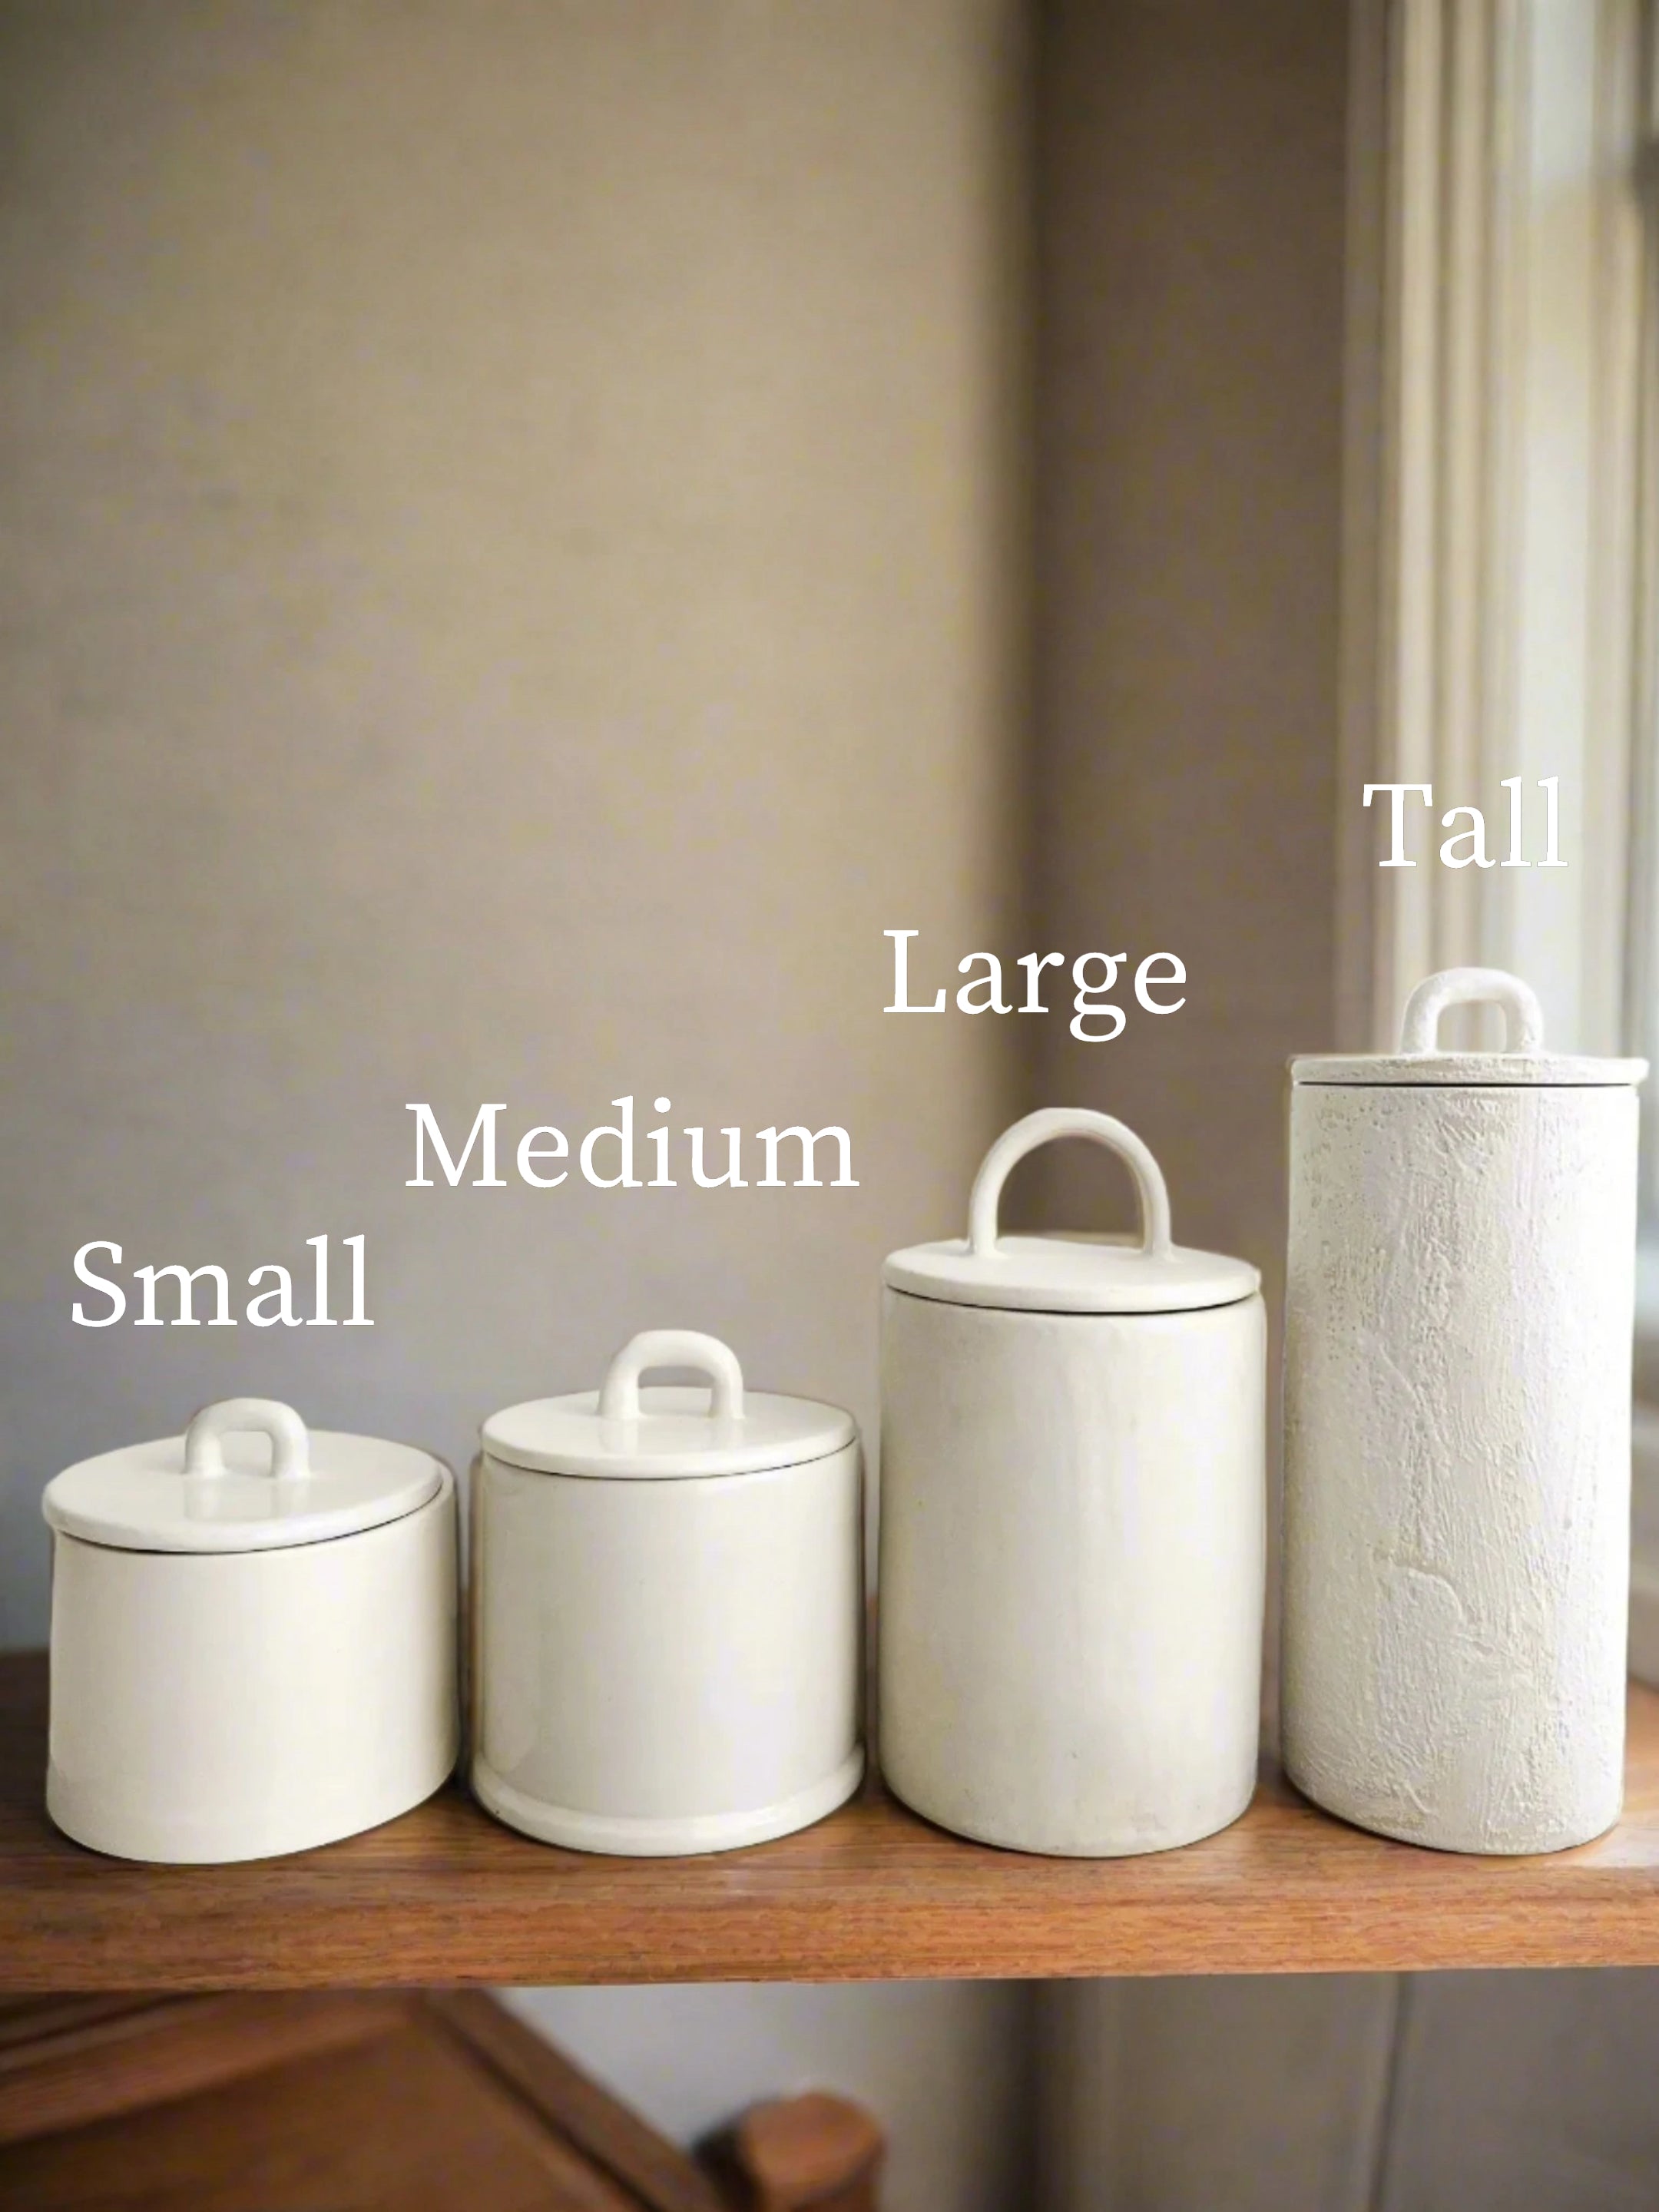 Staggered ceramic canisters set in custom colors and sizes